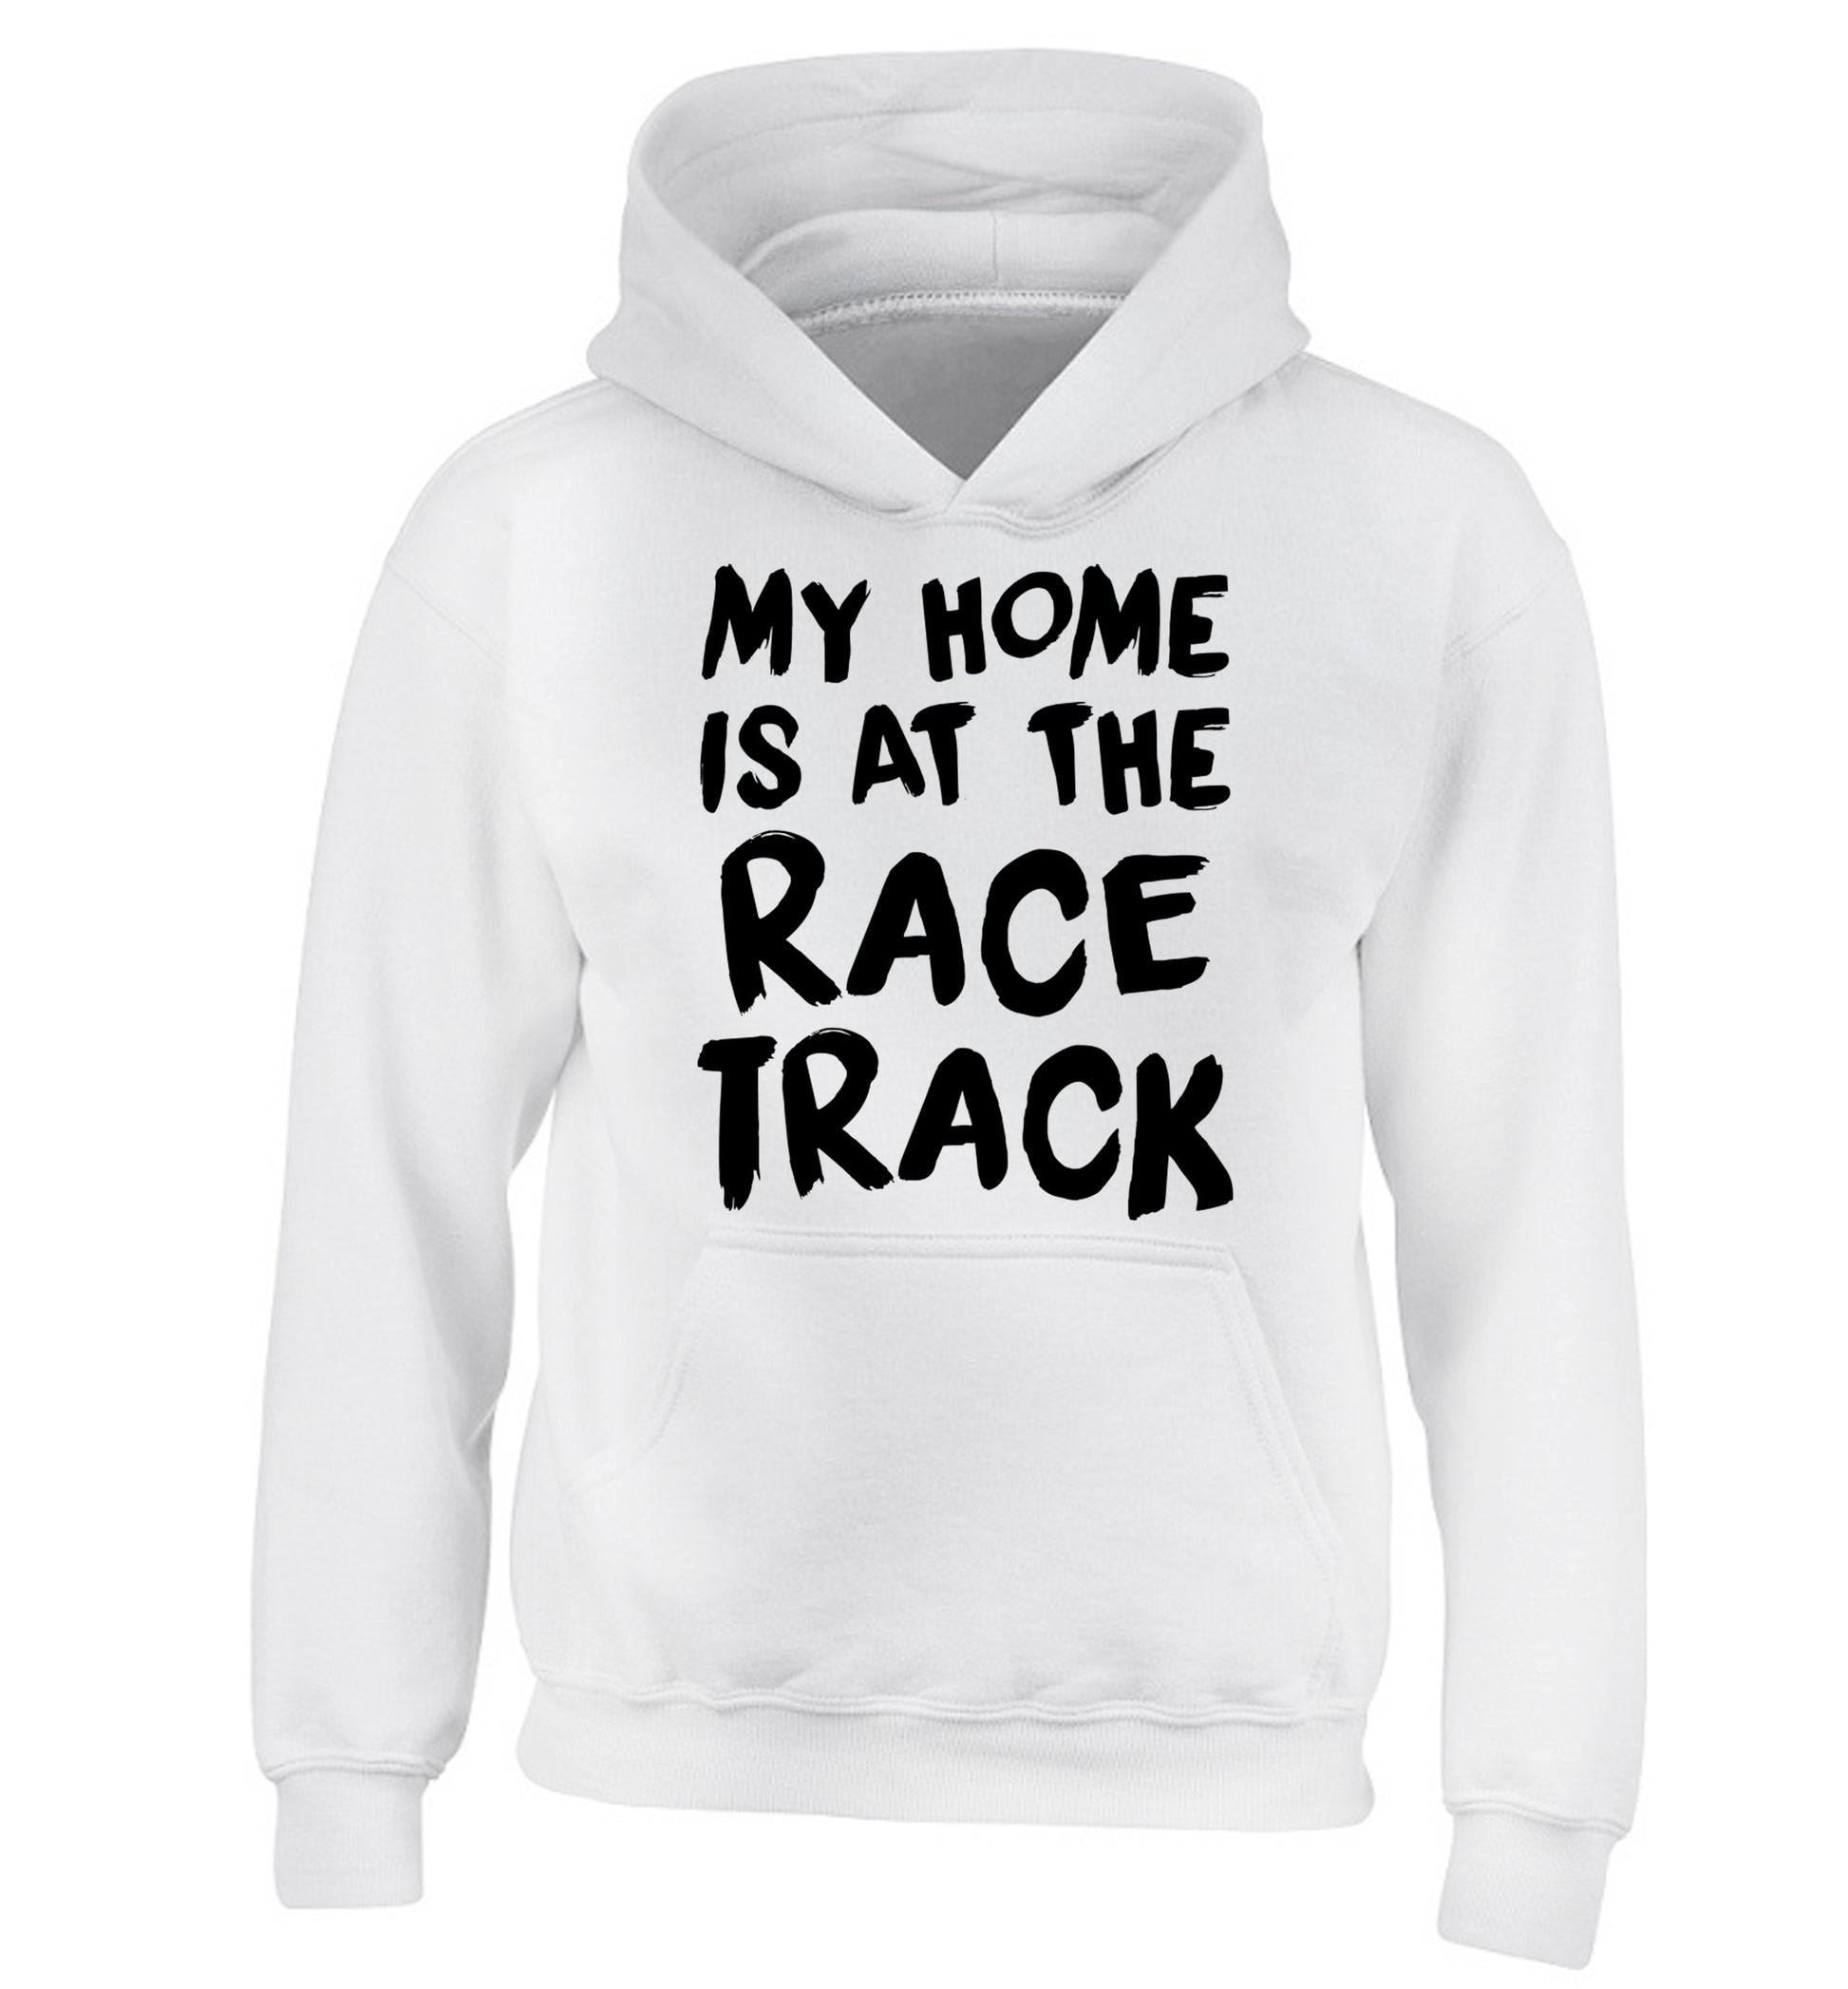 My home is at the race track children's white hoodie 12-14 Years